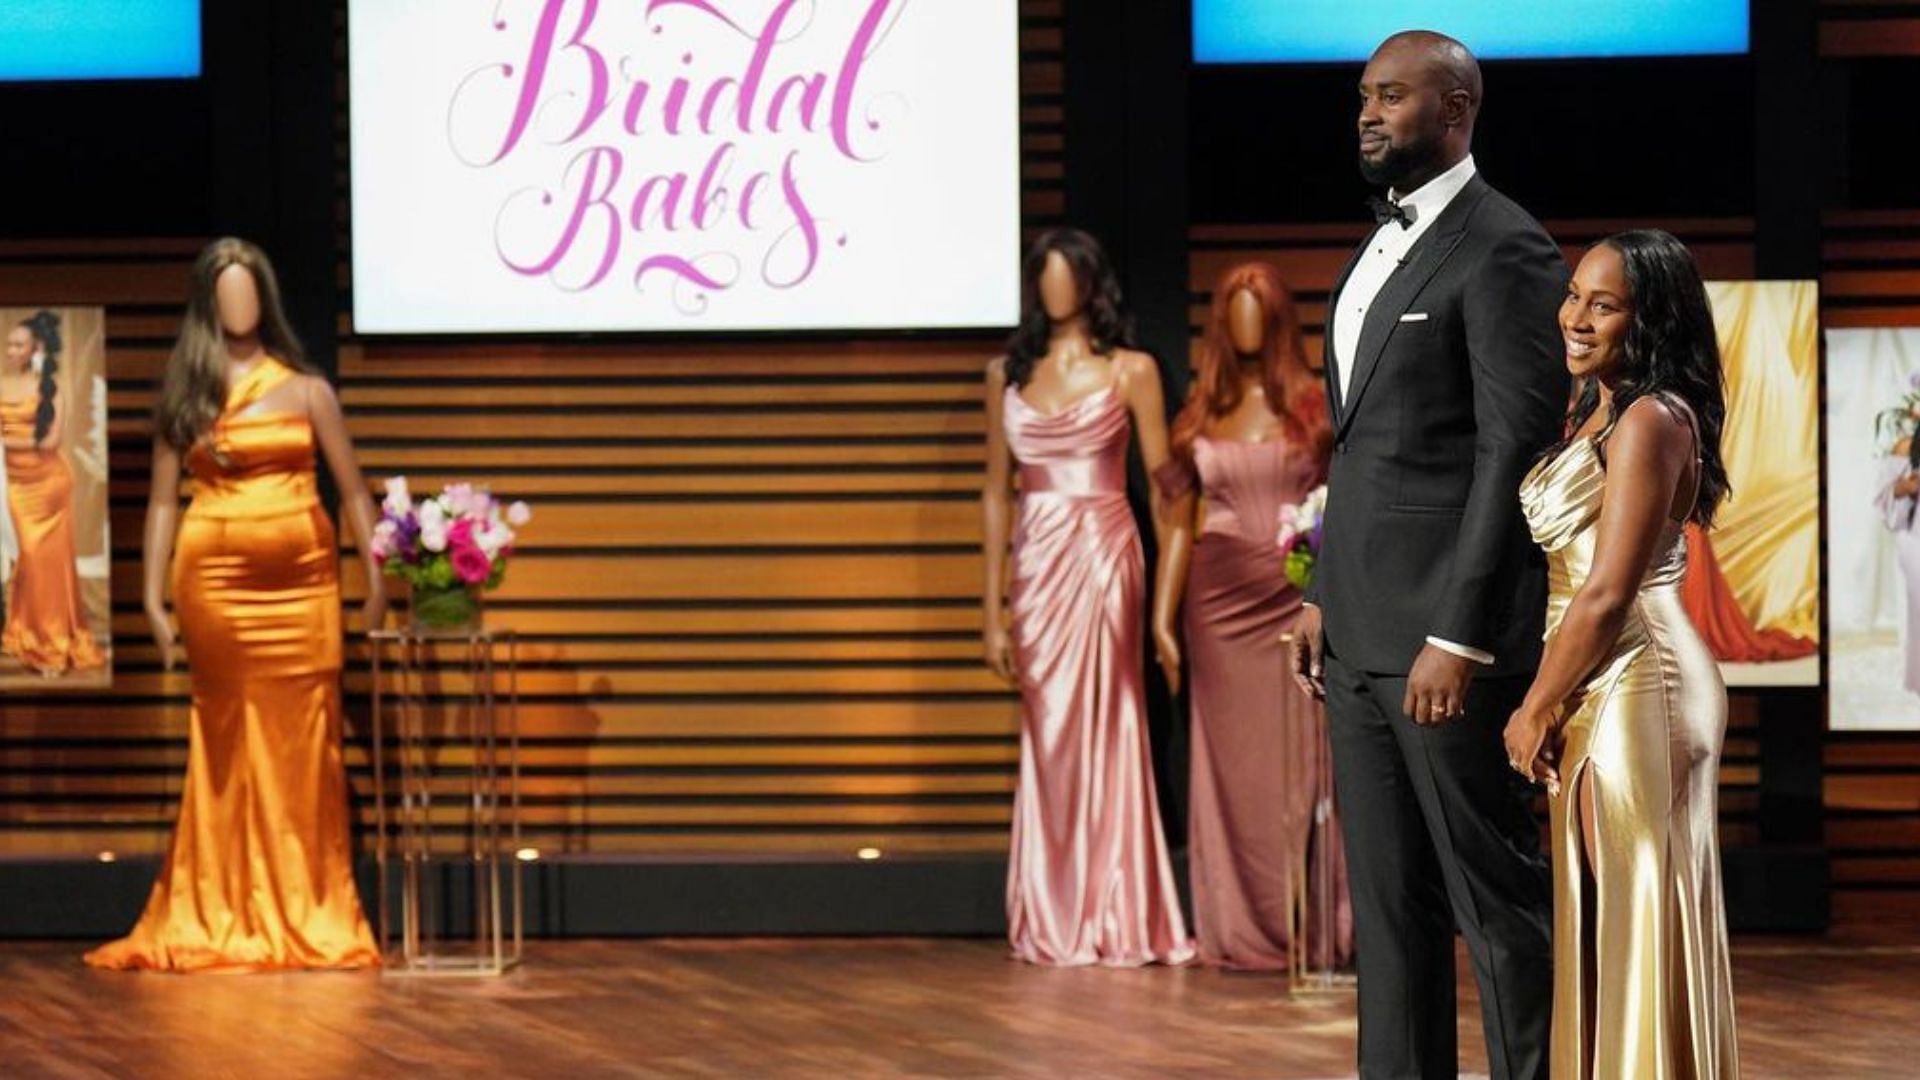 Bridal Babes appearing on Shark Tank on Friday (Image via suitsandsequins and bridalbabes/Instagram)